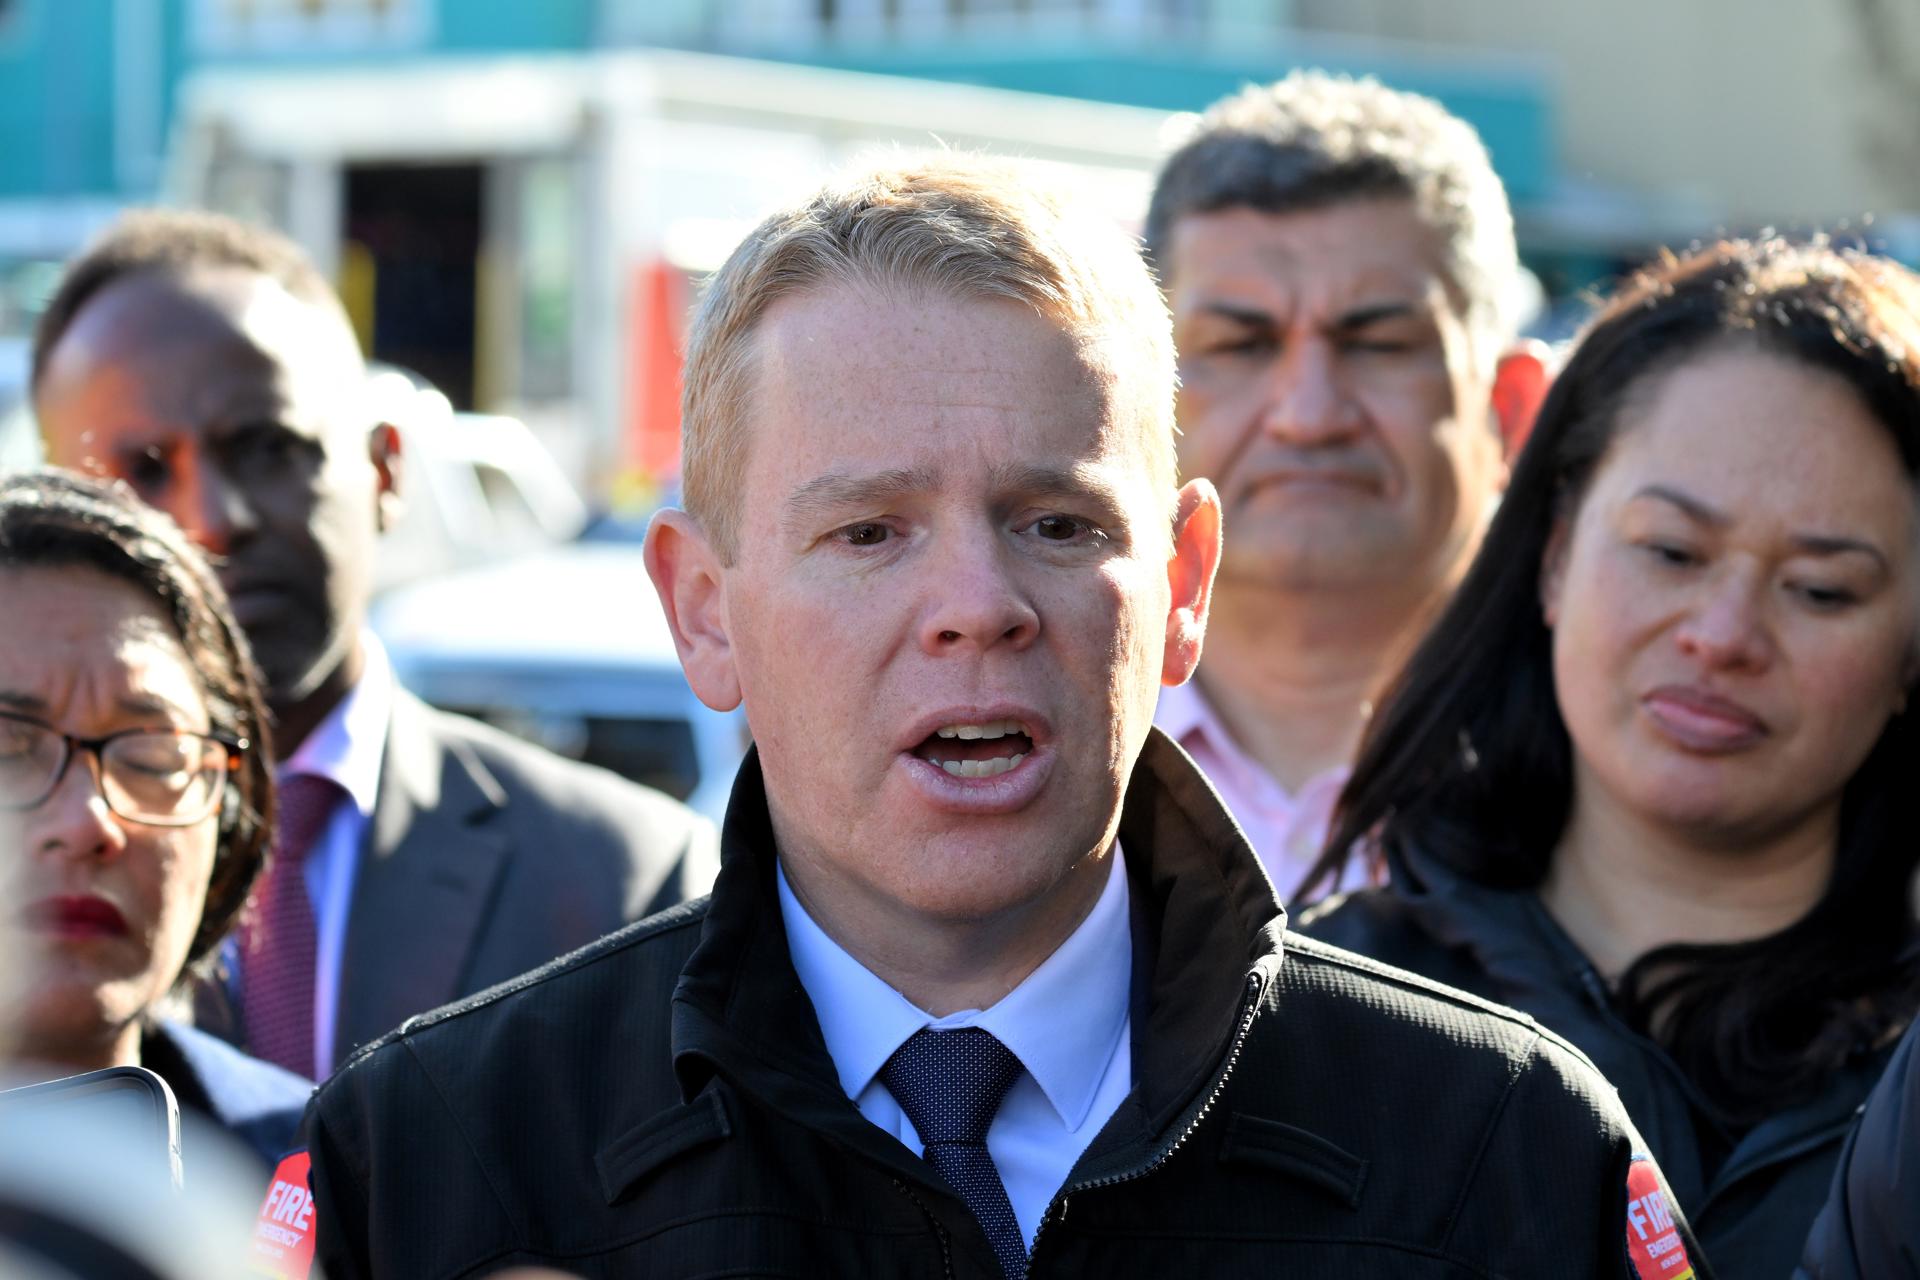 New Zealand Prime Minister Chris Hipkins speaks to members of the media at the scene of a fatal hostel fire, in Wellington, New Zealand, 16 May 2023. EFE/EPA/BEN MCKAY AUSTRALIA AND NEW ZEALAND OUT
